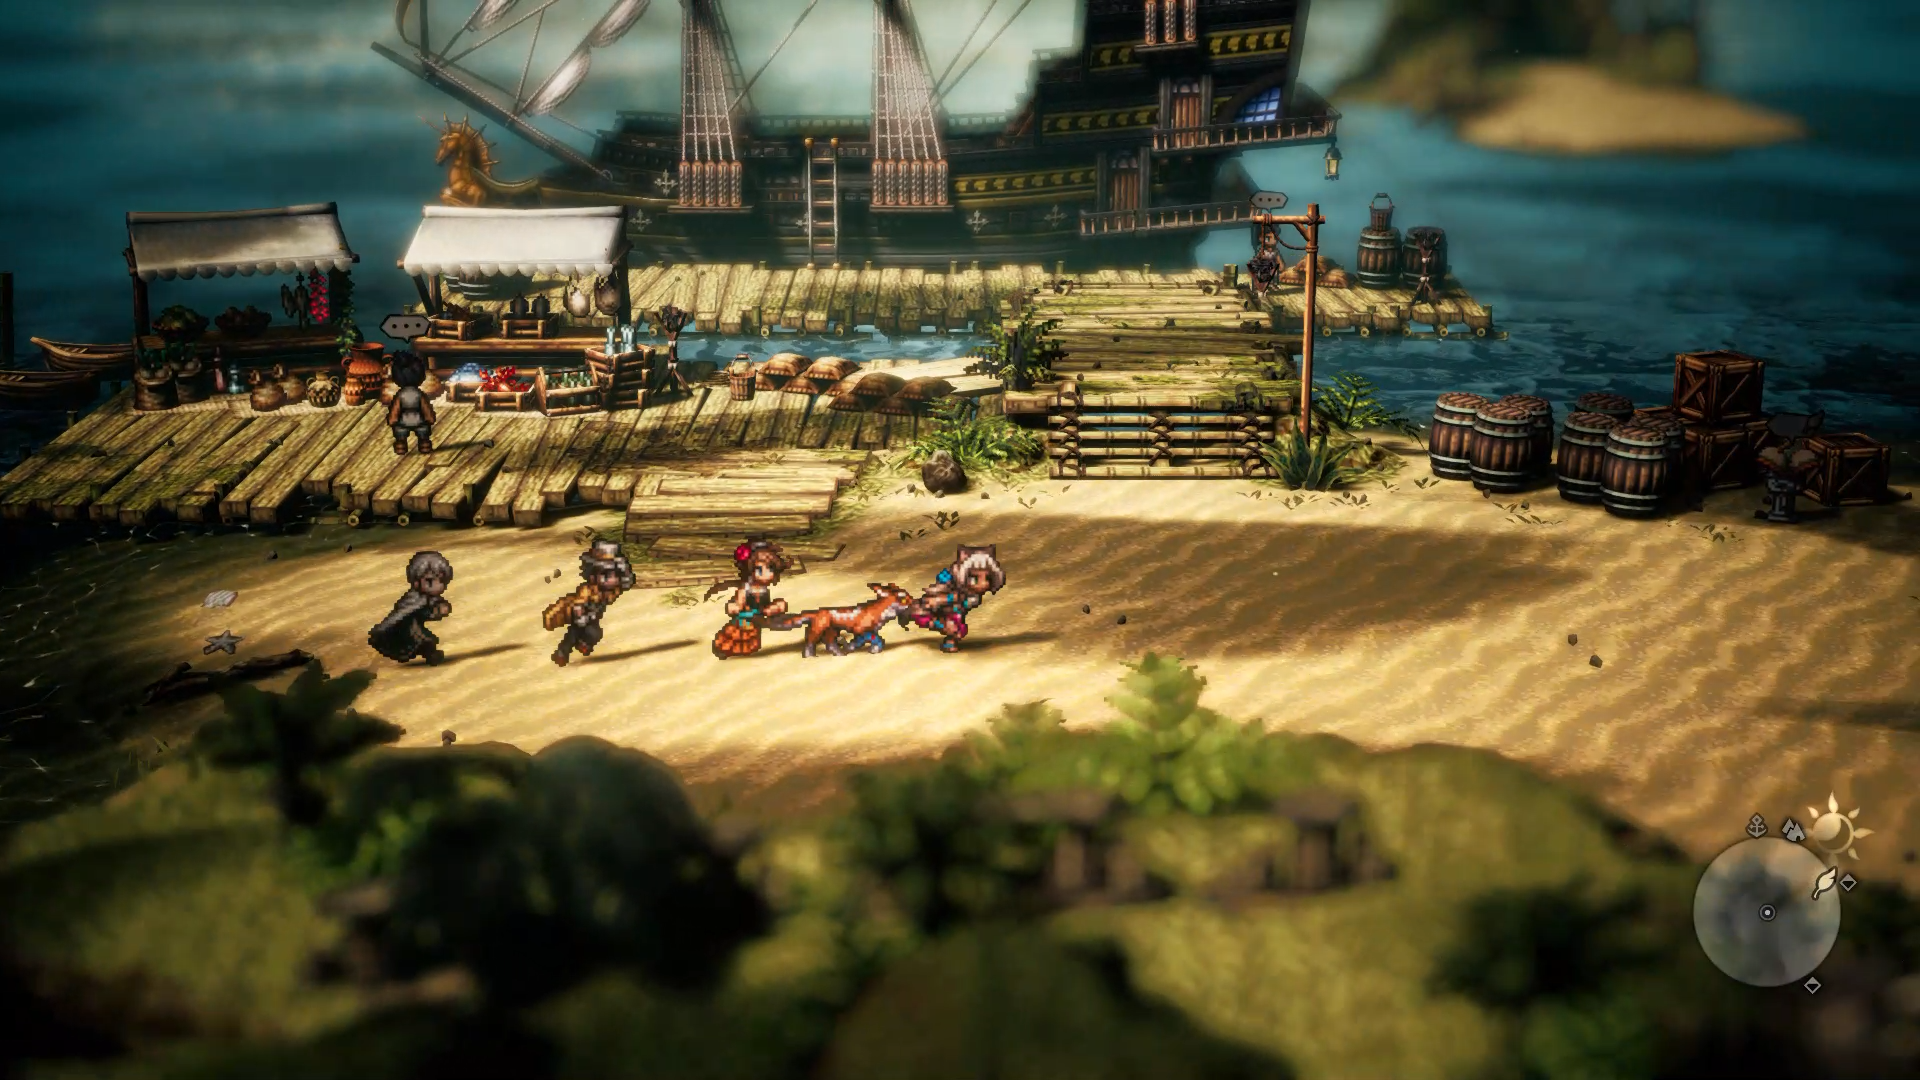 Octopath Traveler 2 – How to complete Reaching for the Stars side story